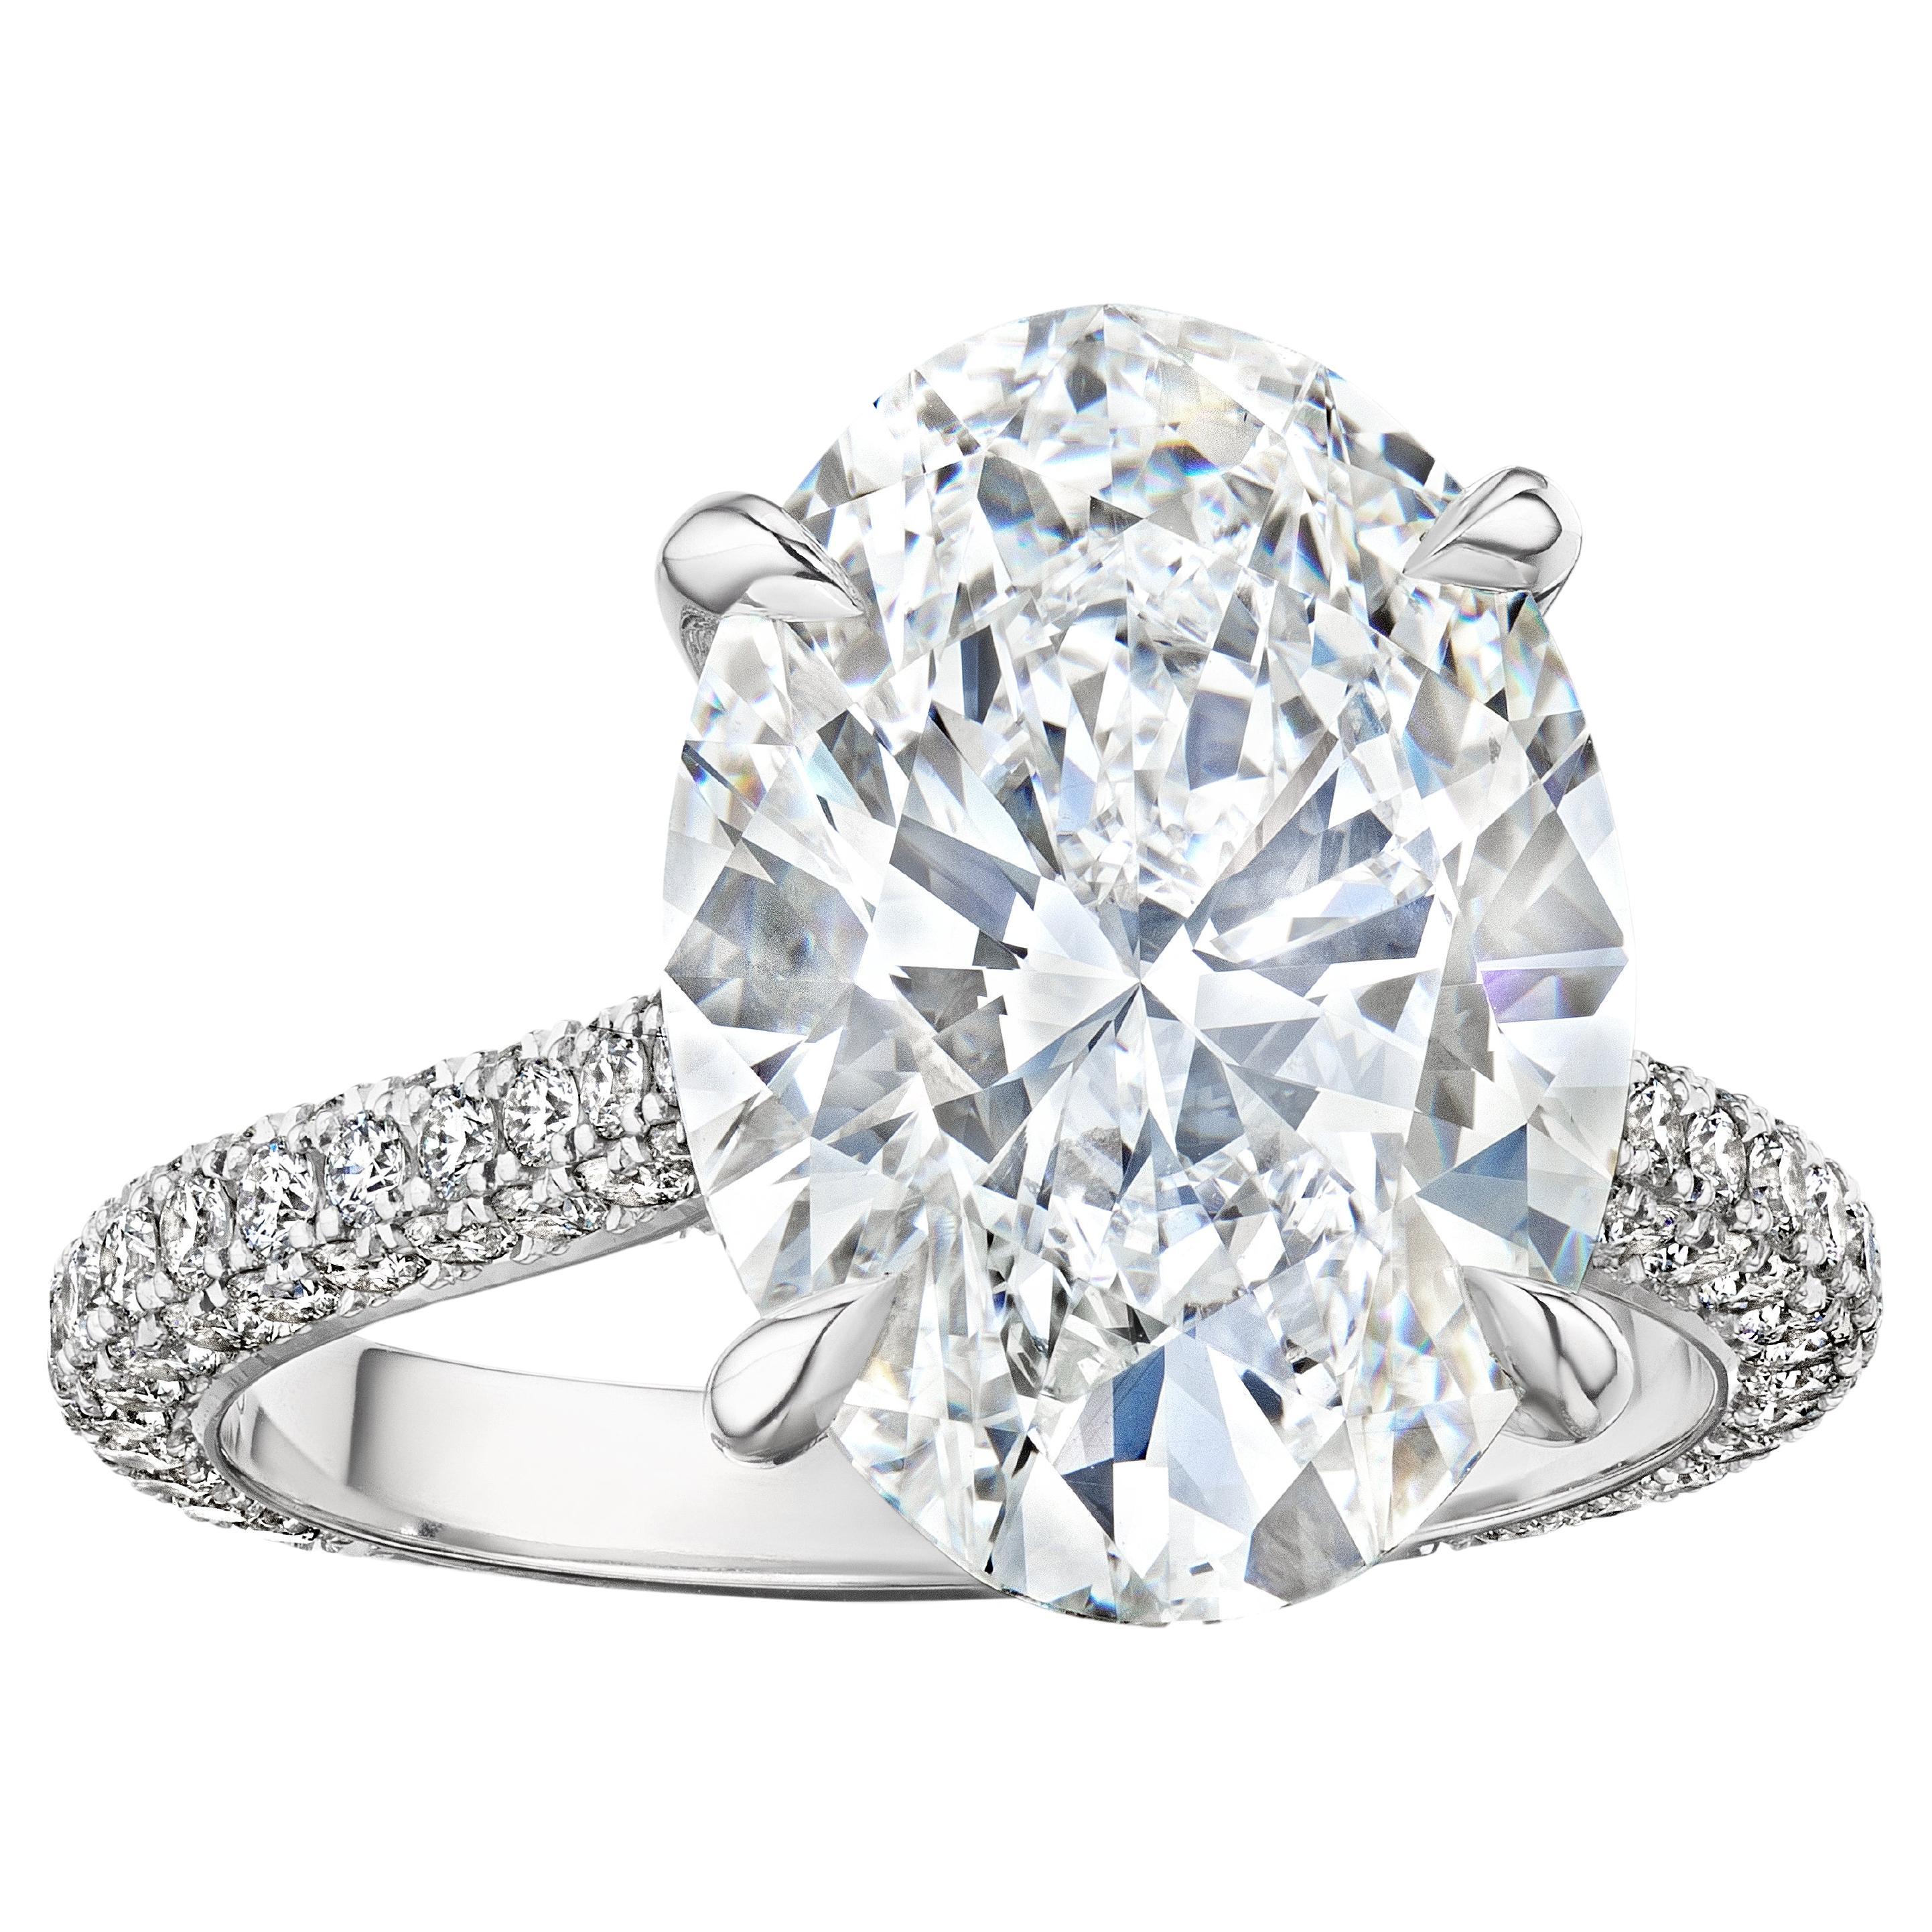 GIA Certified 6 Carat E SI1 Oval Diamond Engagement Ring "Alexandria" For Sale